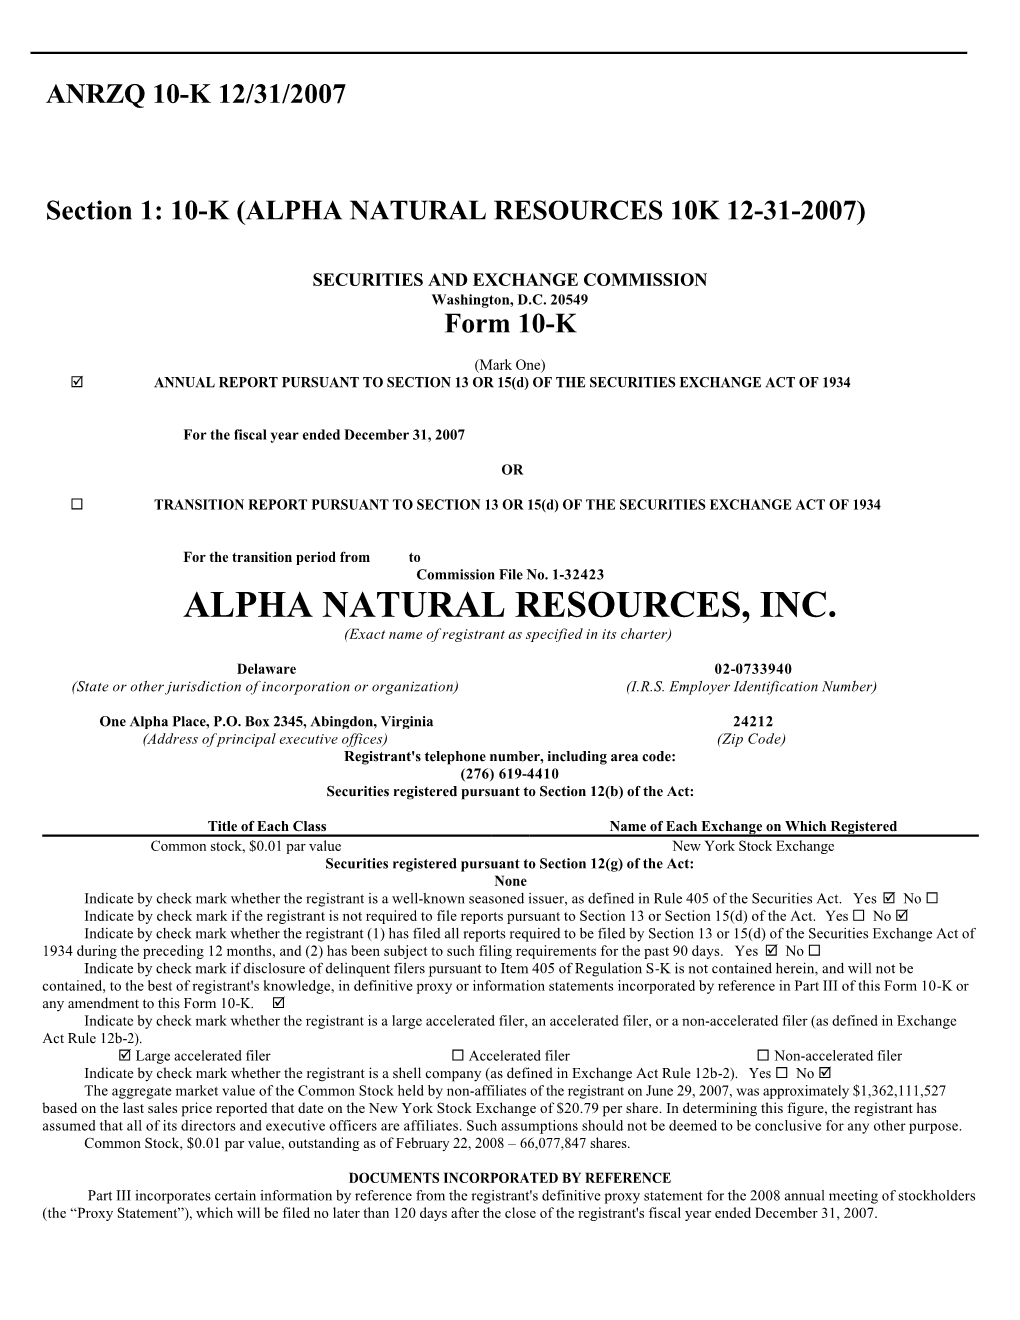 ALPHA NATURAL RESOURCES, INC. (Exact Name of Registrant As Specified in Its Charter)